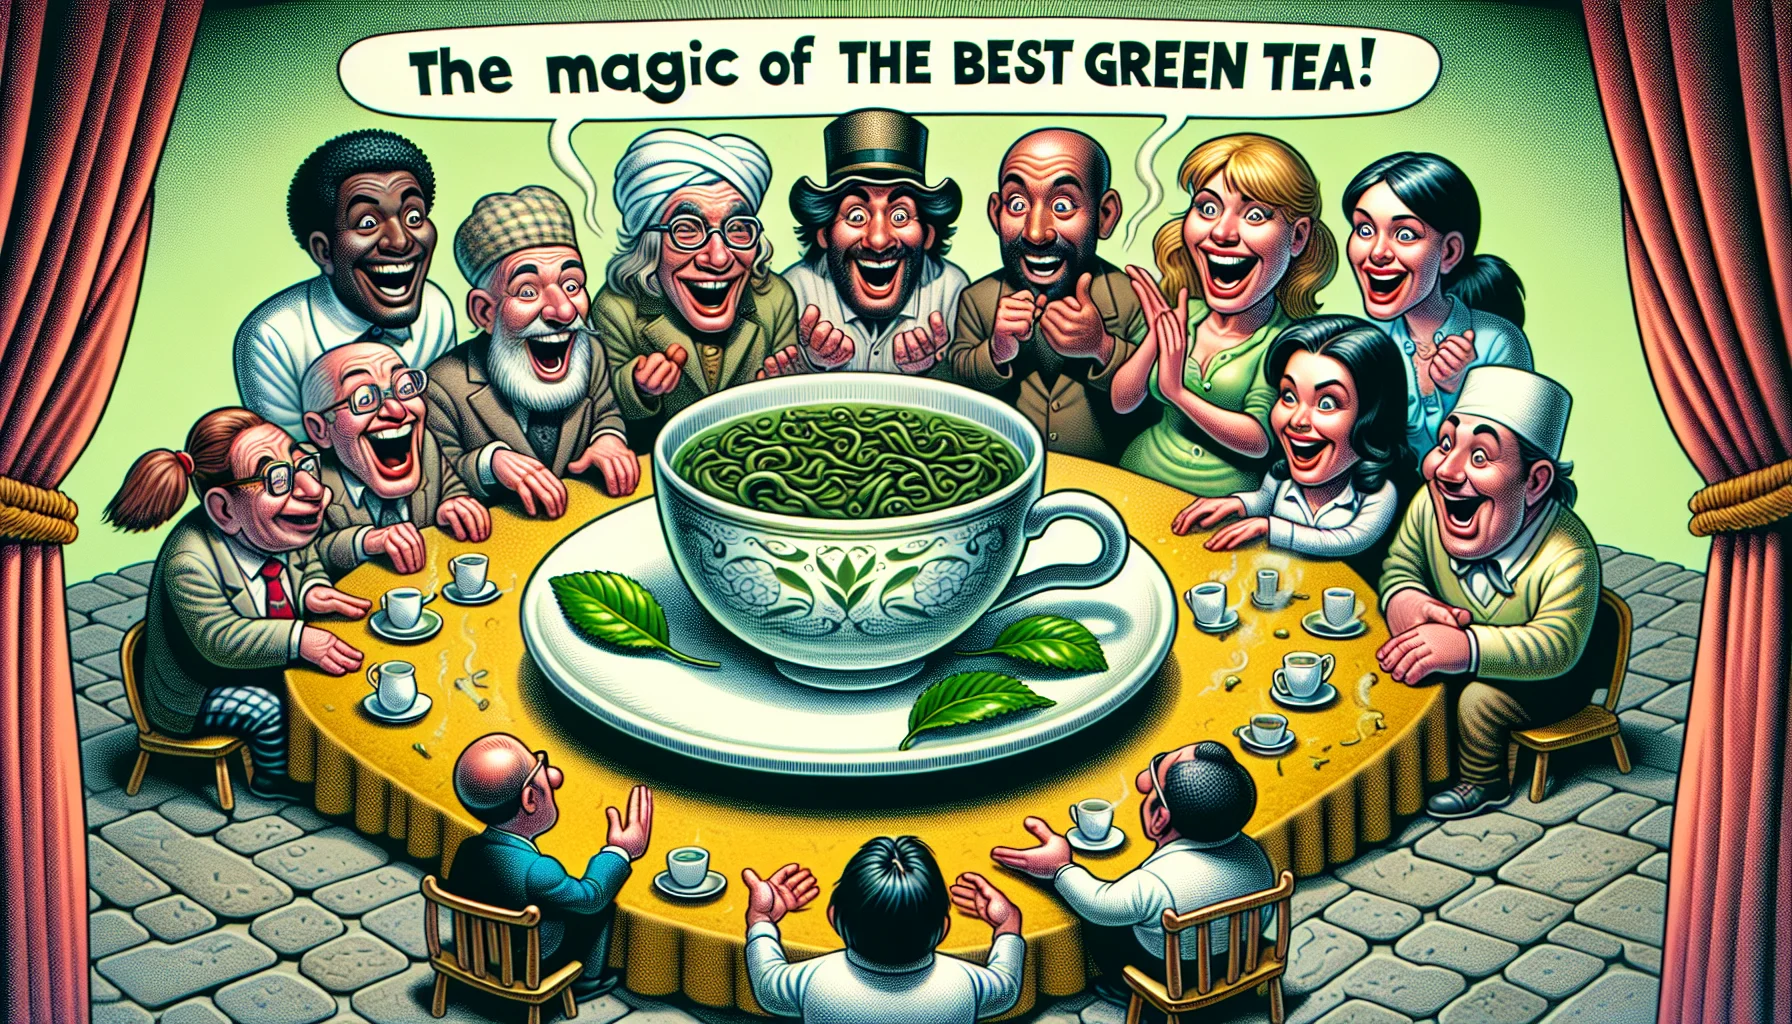 Show an image of a humorous and enticing scene at a tea party. A steaming cup of the finest green tea is placed on an eccentrically designed table. Various amused guests belonging to both genders and different descents such as Caucasian, Black, Hispanic, Middle-Eastern, and South Asian are pleasantly surprised by delightful floating tea leaves forming interesting and amusing shapes around the cup, suggesting the magic of the green tea. The atmosphere is jovial, light-hearted and infectious, encouraging everyone present to enjoy the experience of the best green tea.